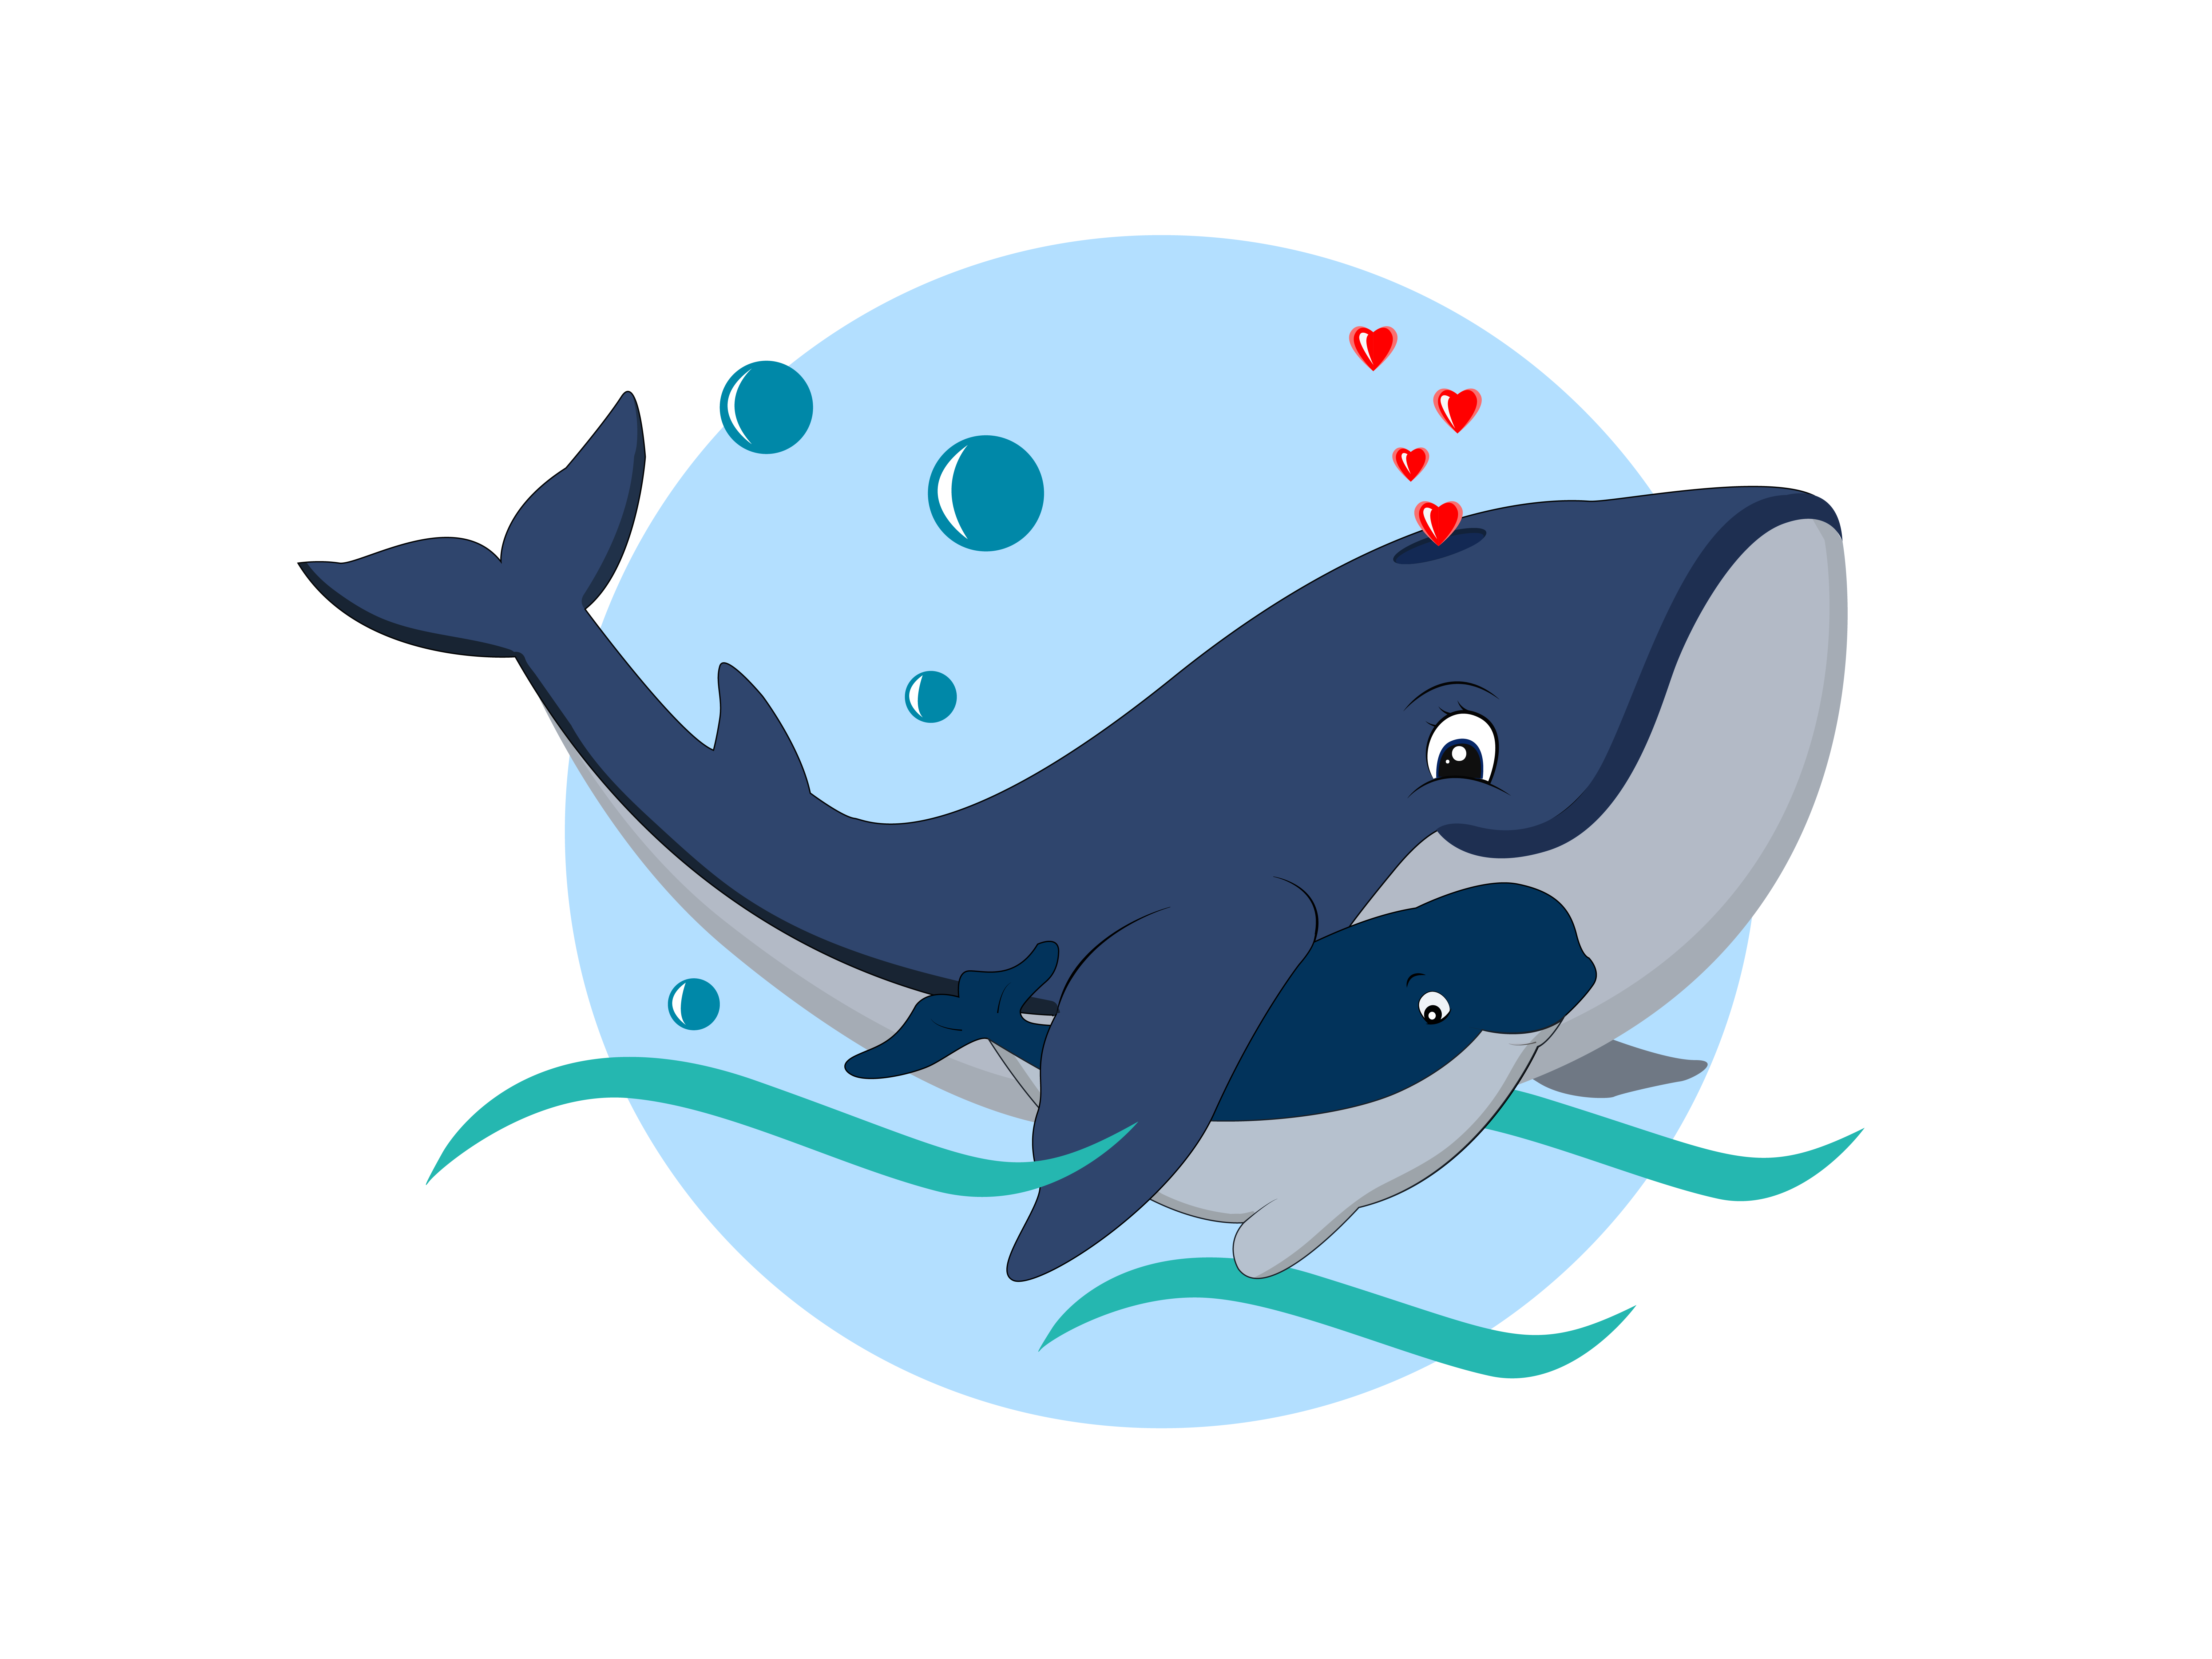 Whale1. whale1.png. 